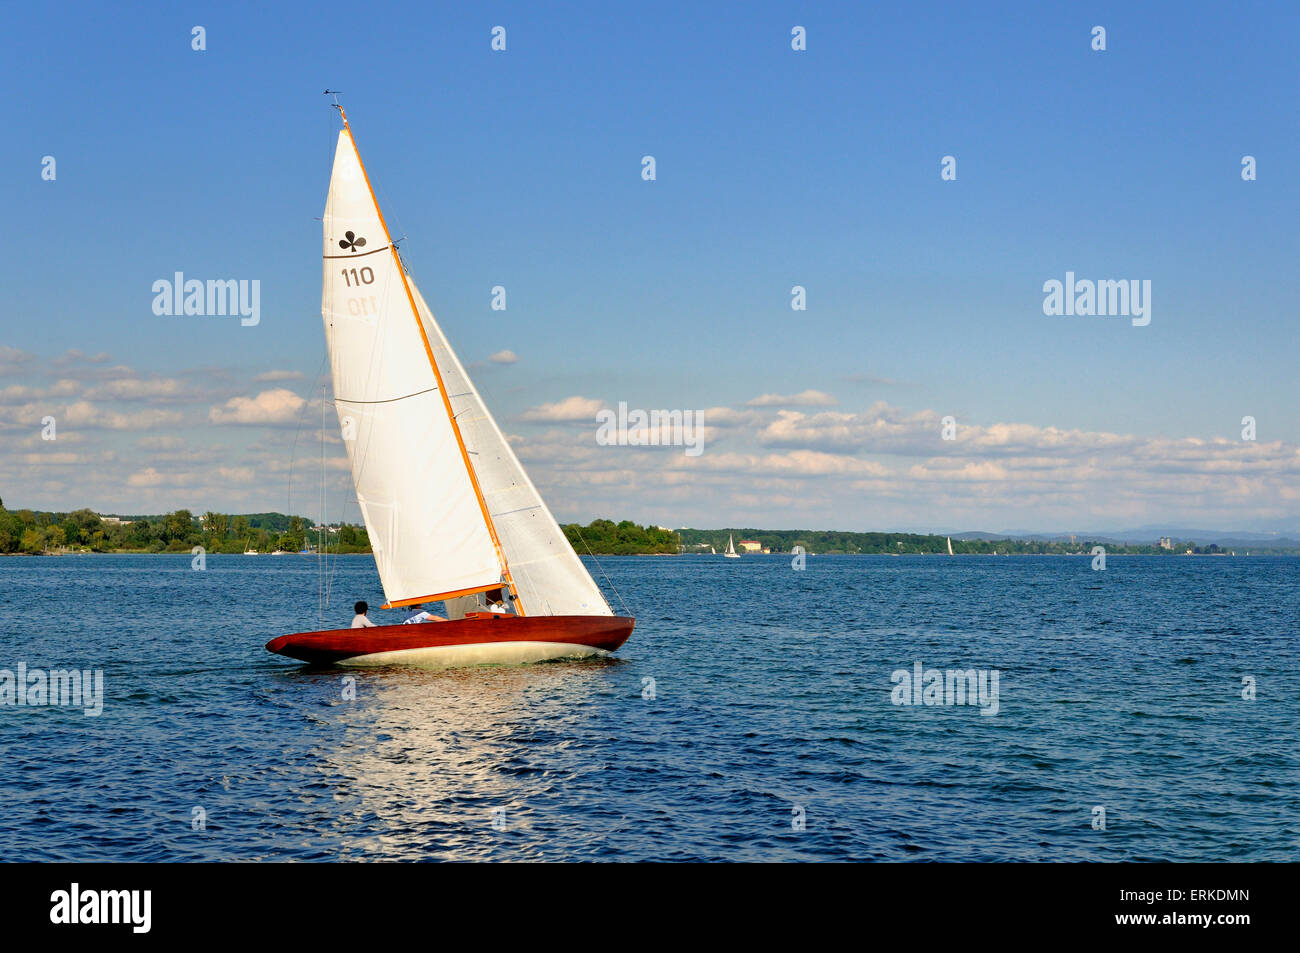 Sailboat on Lake Constance, Baden-Württemberg, Germany Stock Photo